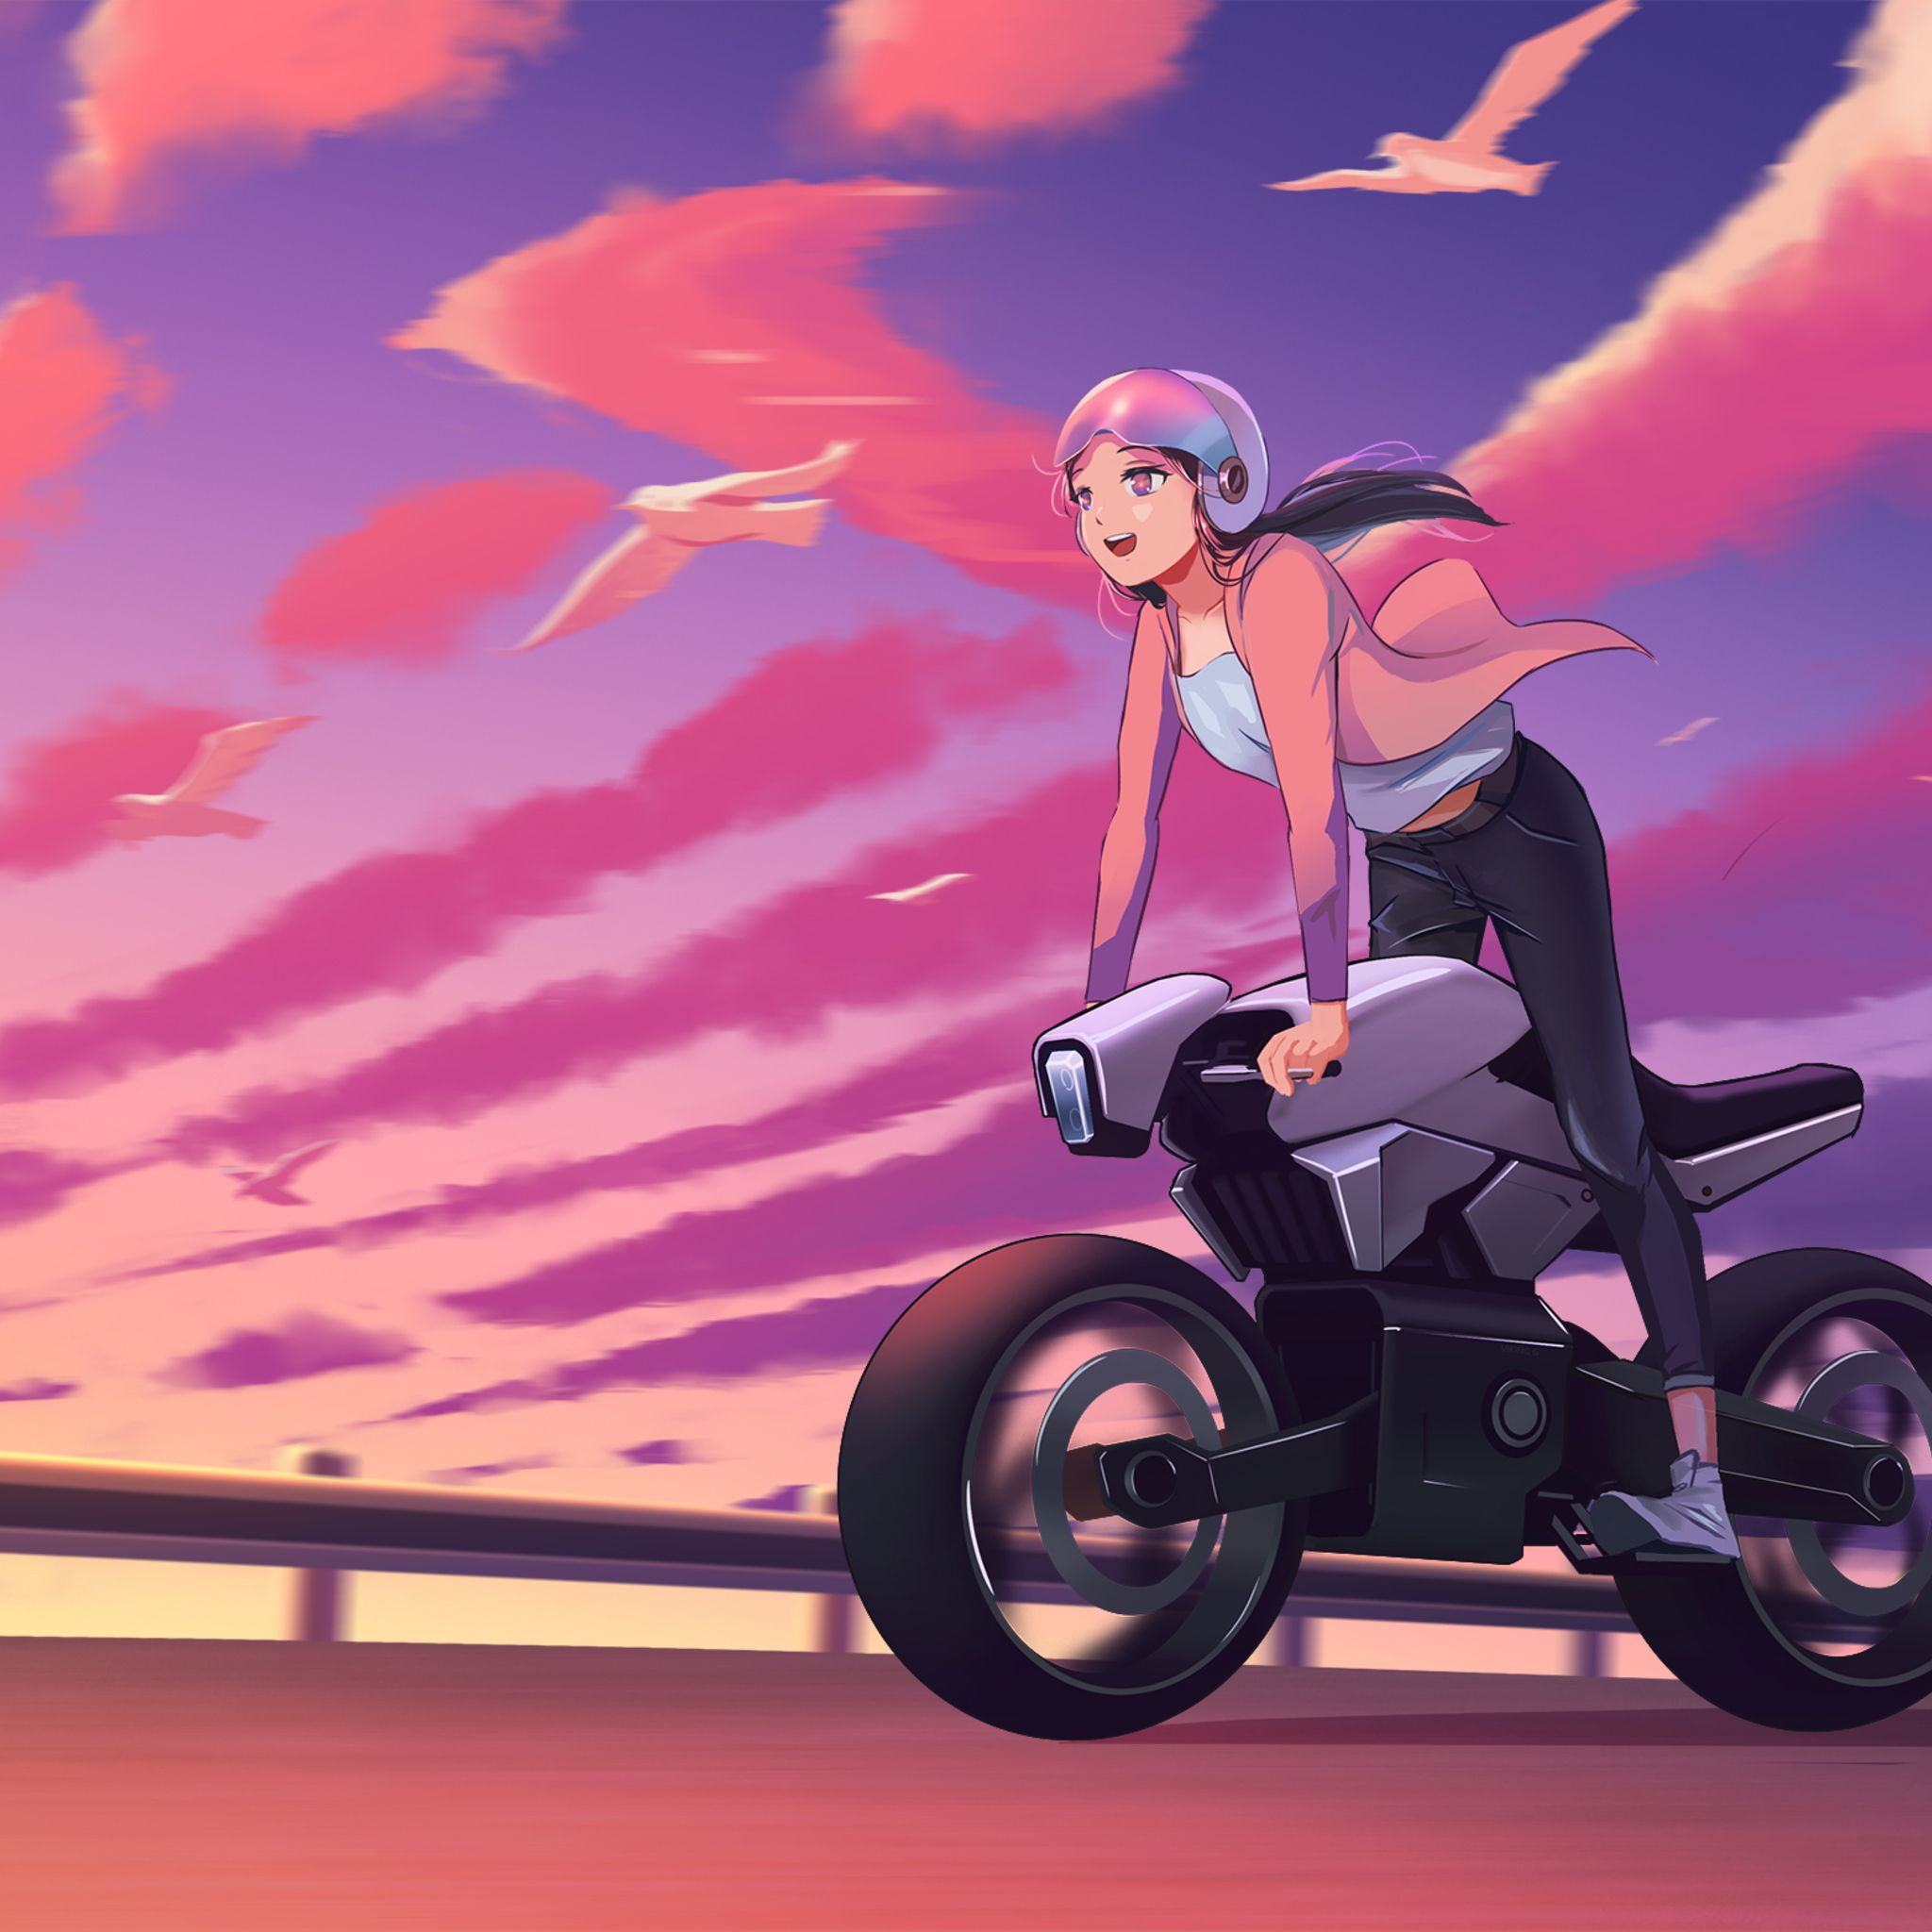 Anime Biker Girl Art iPad Air HD 4k Wallpaper, Image, Background, Photo and Picture